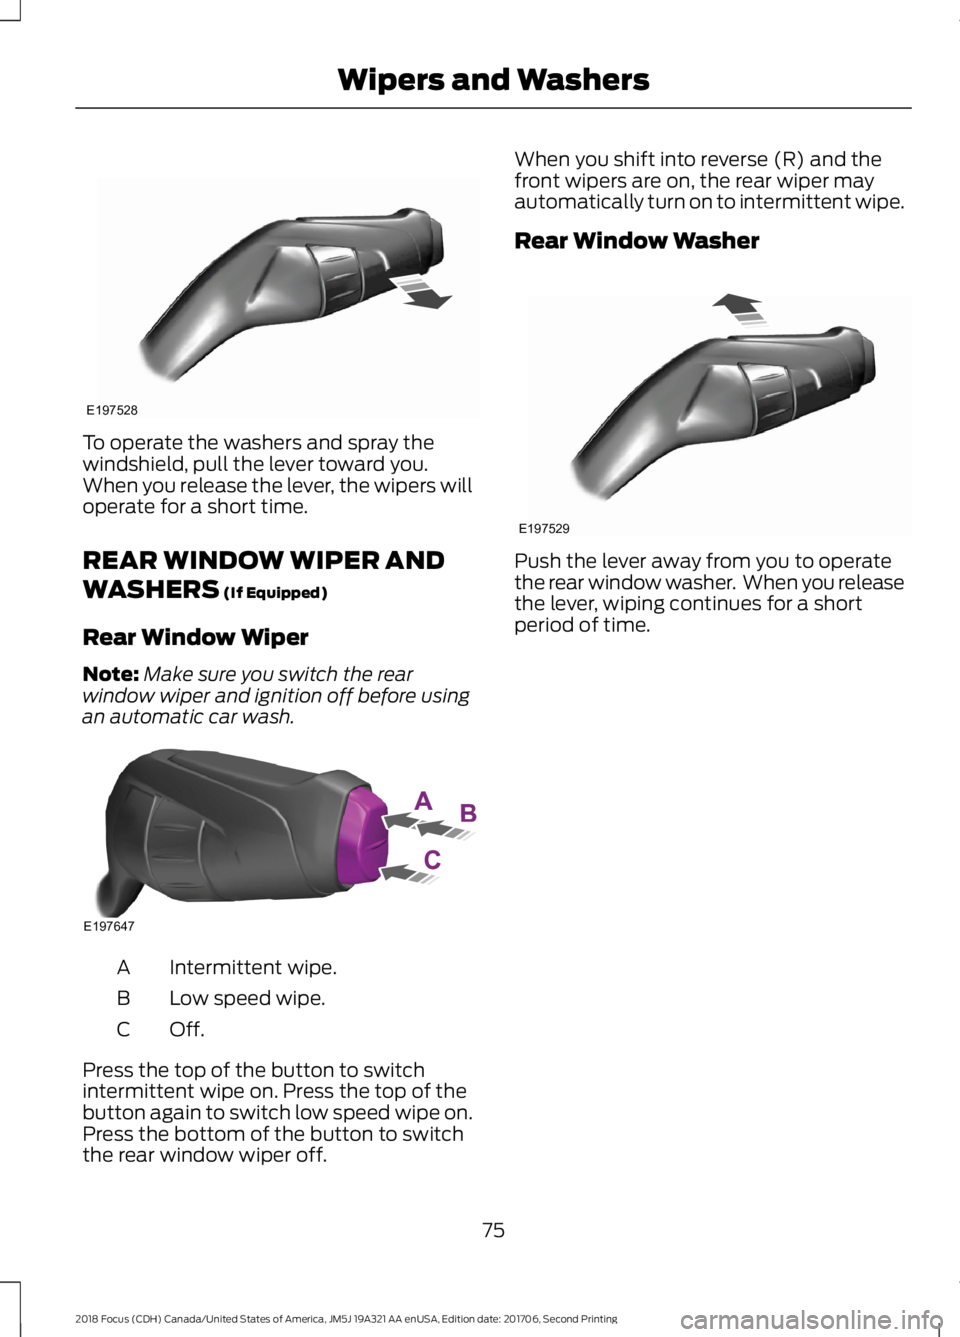 FORD FOCUS 2018  Owners Manual To operate the washers and spray thewindshield, pull the lever toward you.When you release the lever, the wipers willoperate for a short time.
REAR WINDOW WIPER AND
WASHERS (If Equipped)
Rear Window W